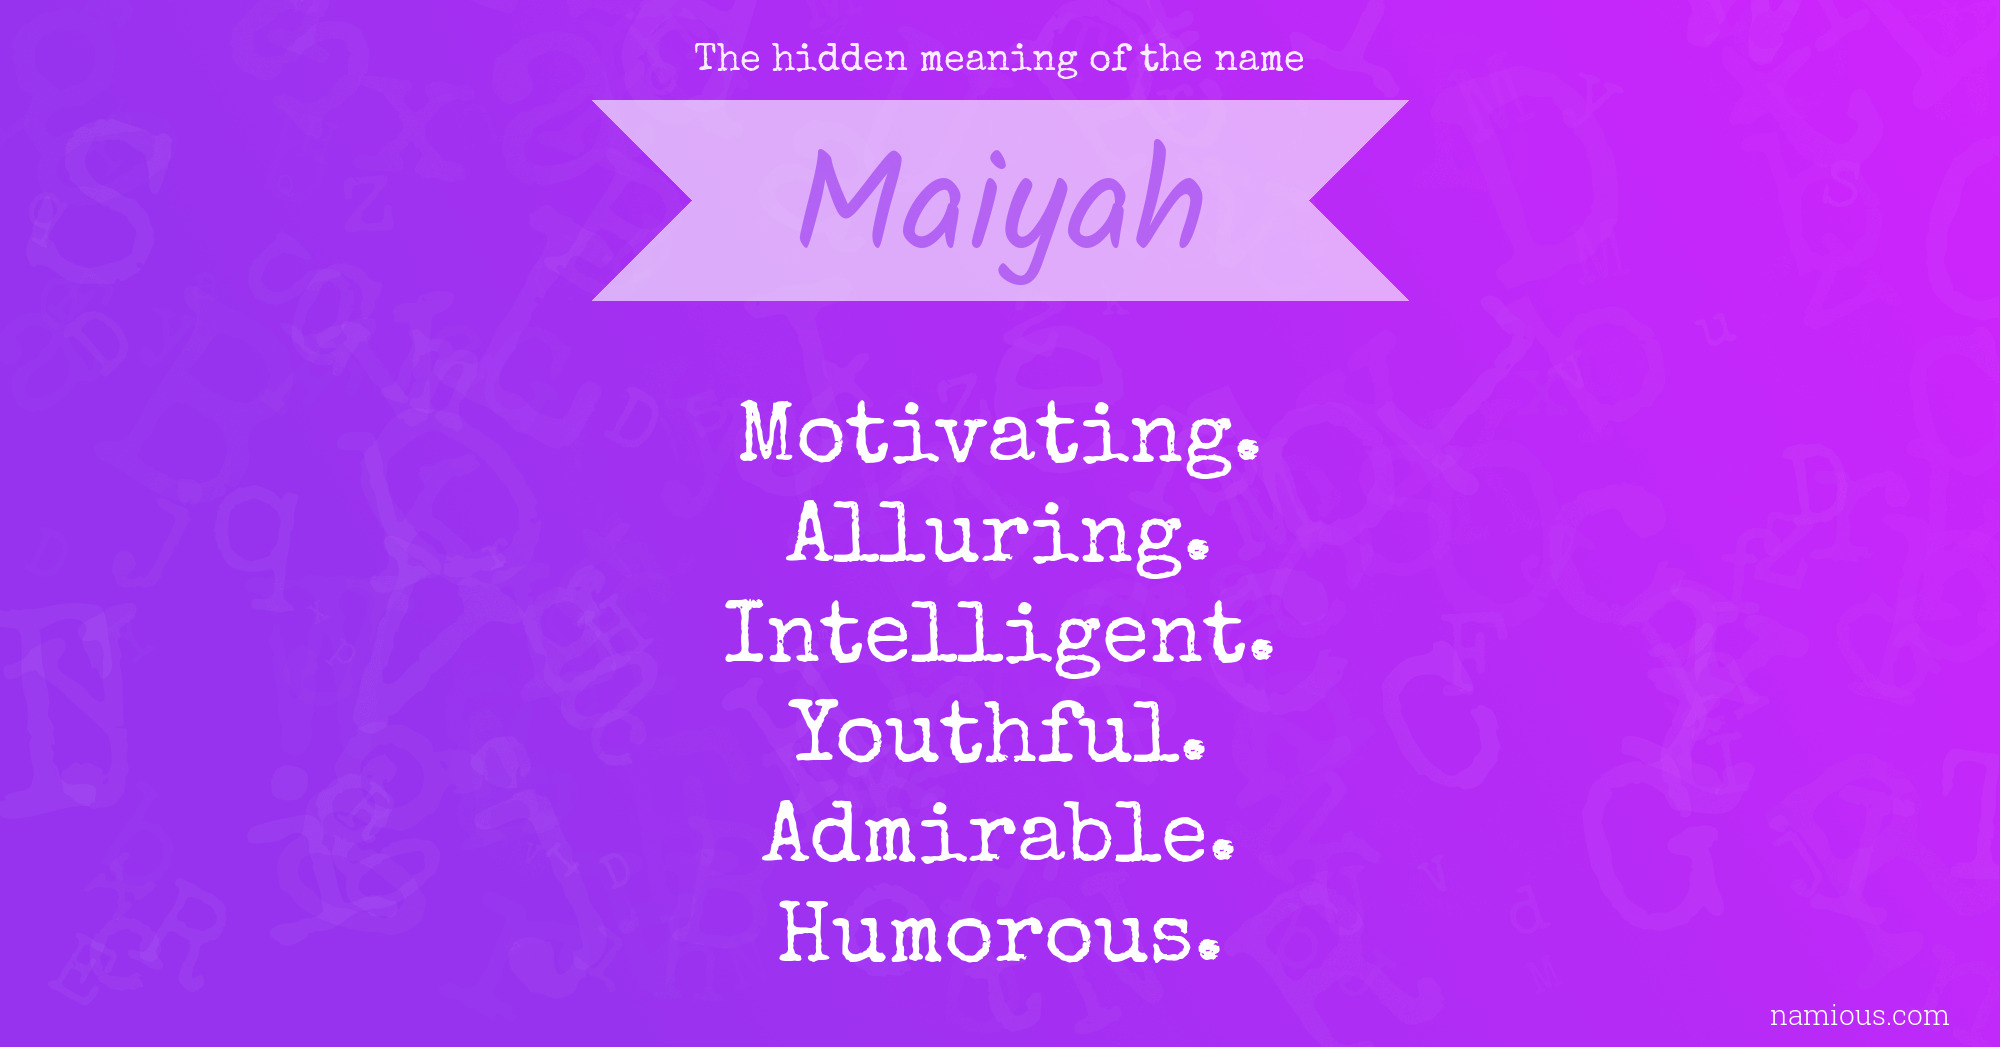 The hidden meaning of the name Maiyah